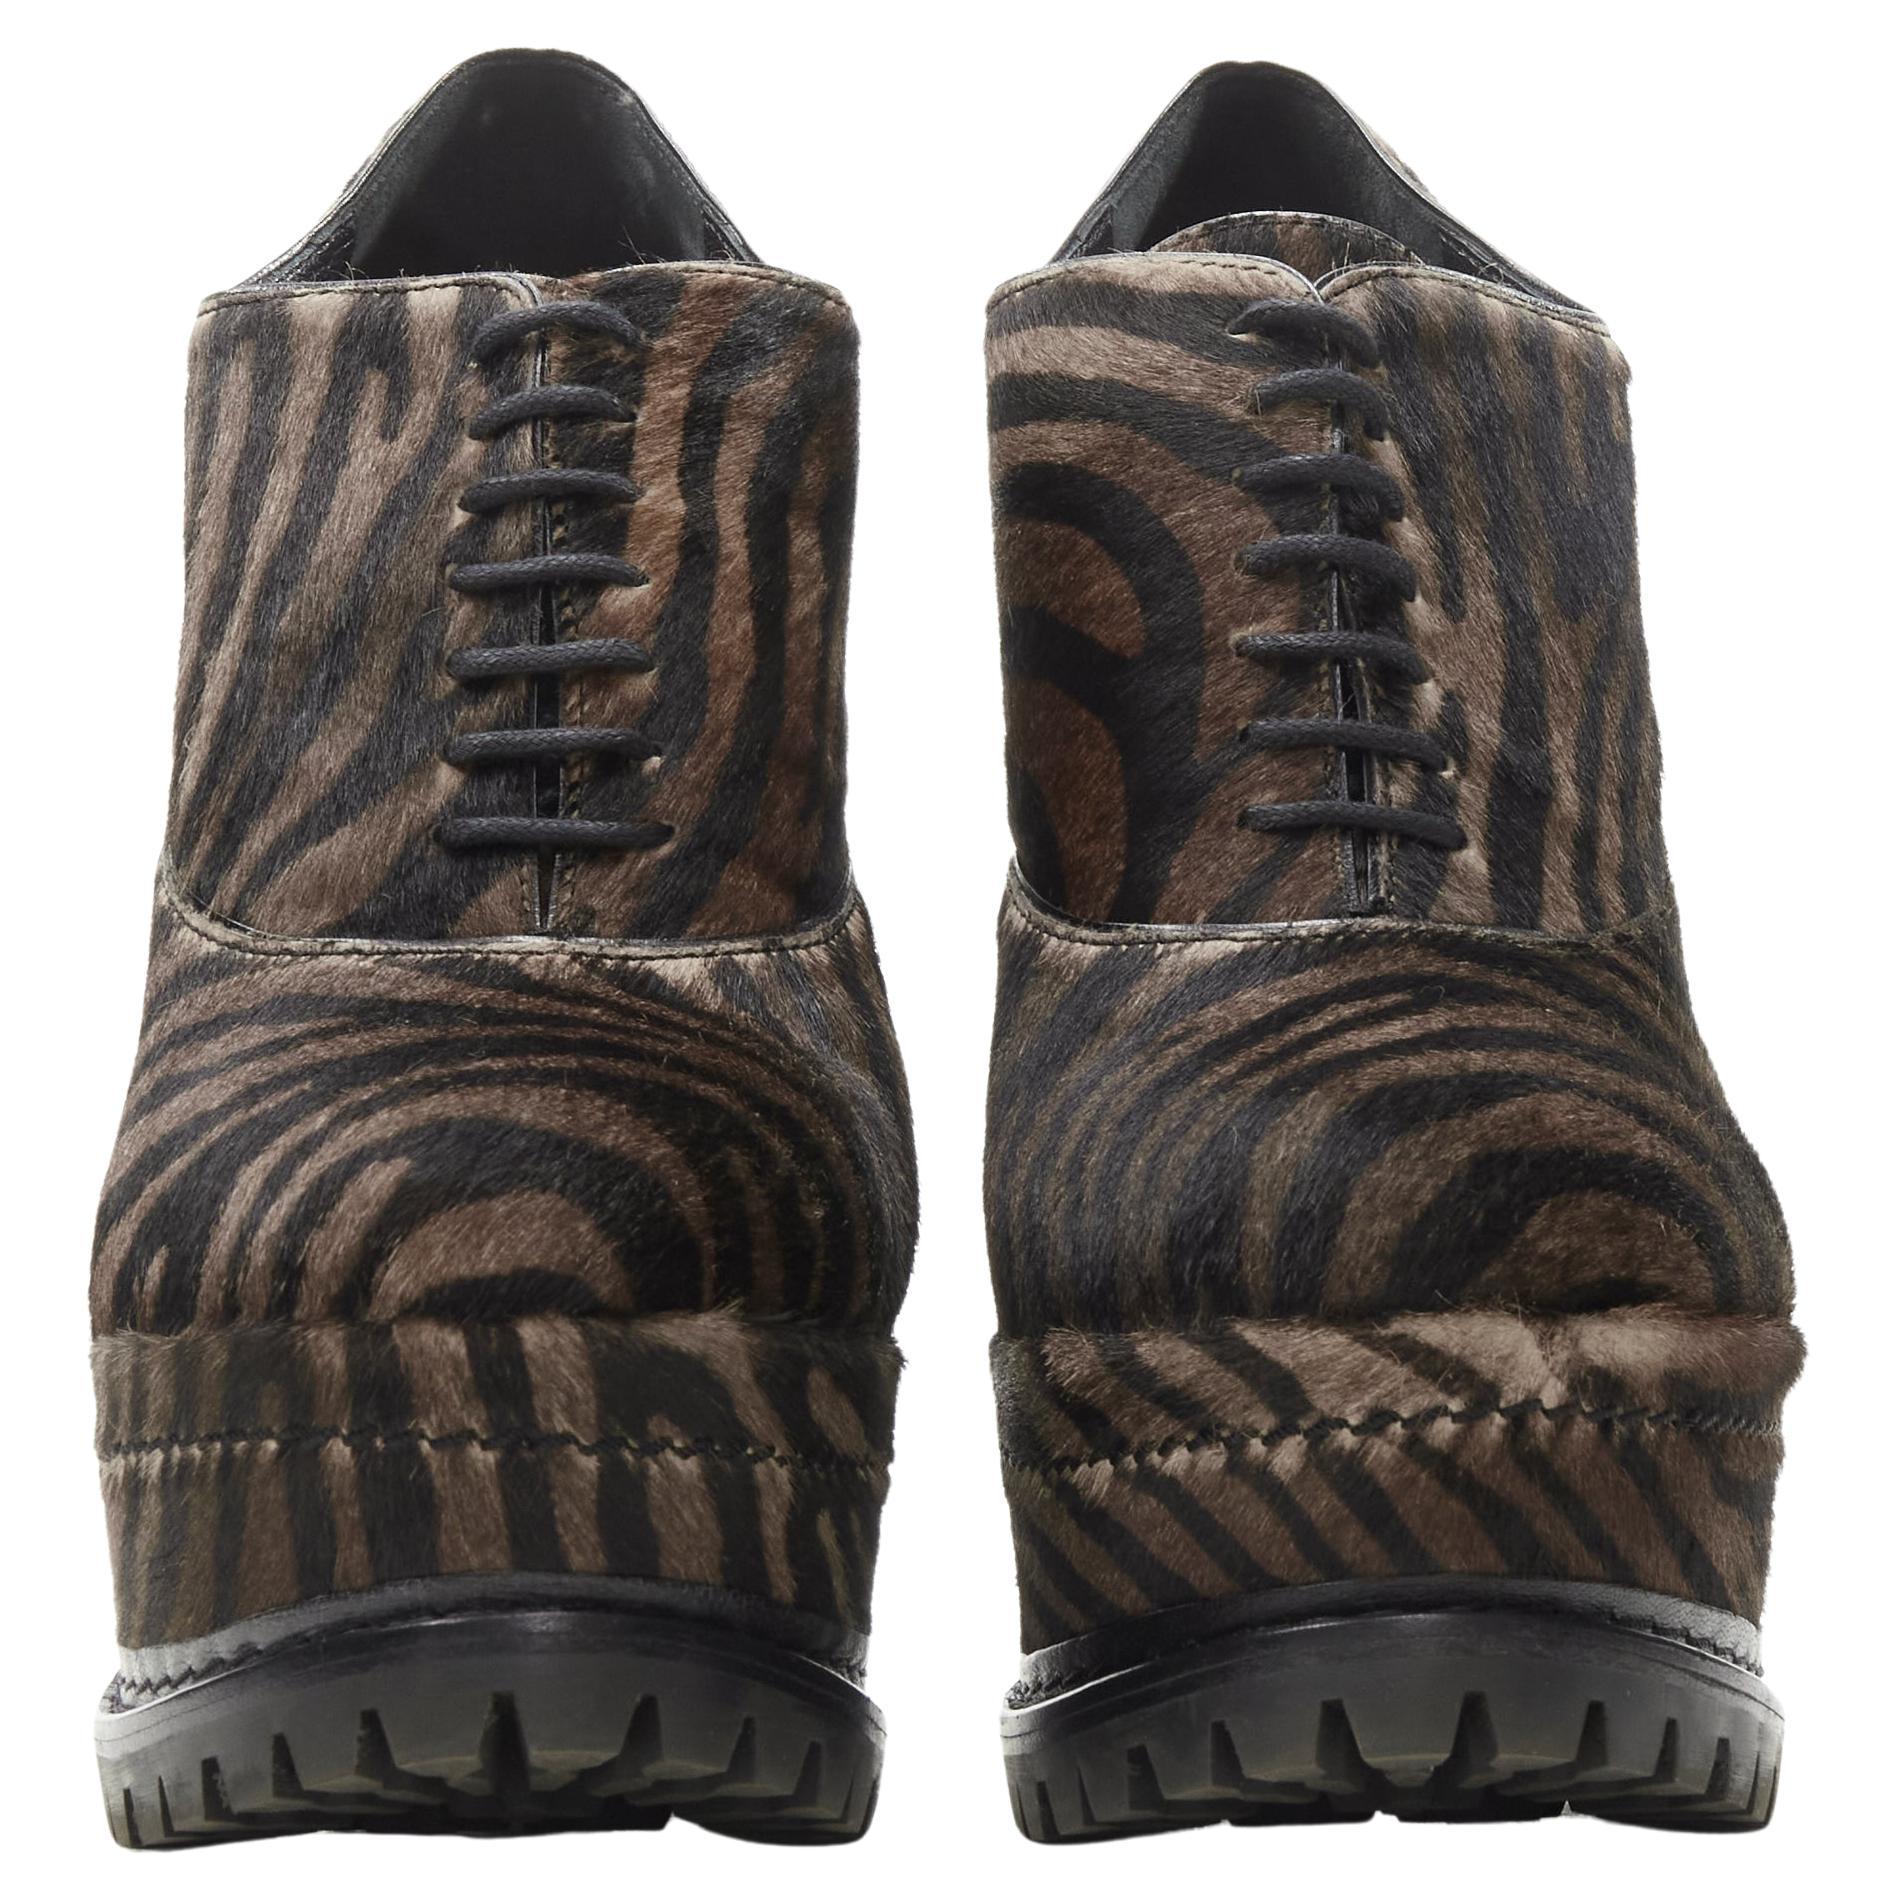 ALAIA brown black zebra stripe fur leather truck sole ankle bootie EU36.5
Brand: Alaia
Designer: Azzedine Alaia
Material: Leather
Color: Brown
Pattern: Zebra
Extra Detail: Trucker rugged sole. Laced front.
Made in: Italy

CONDITION:
Condition: